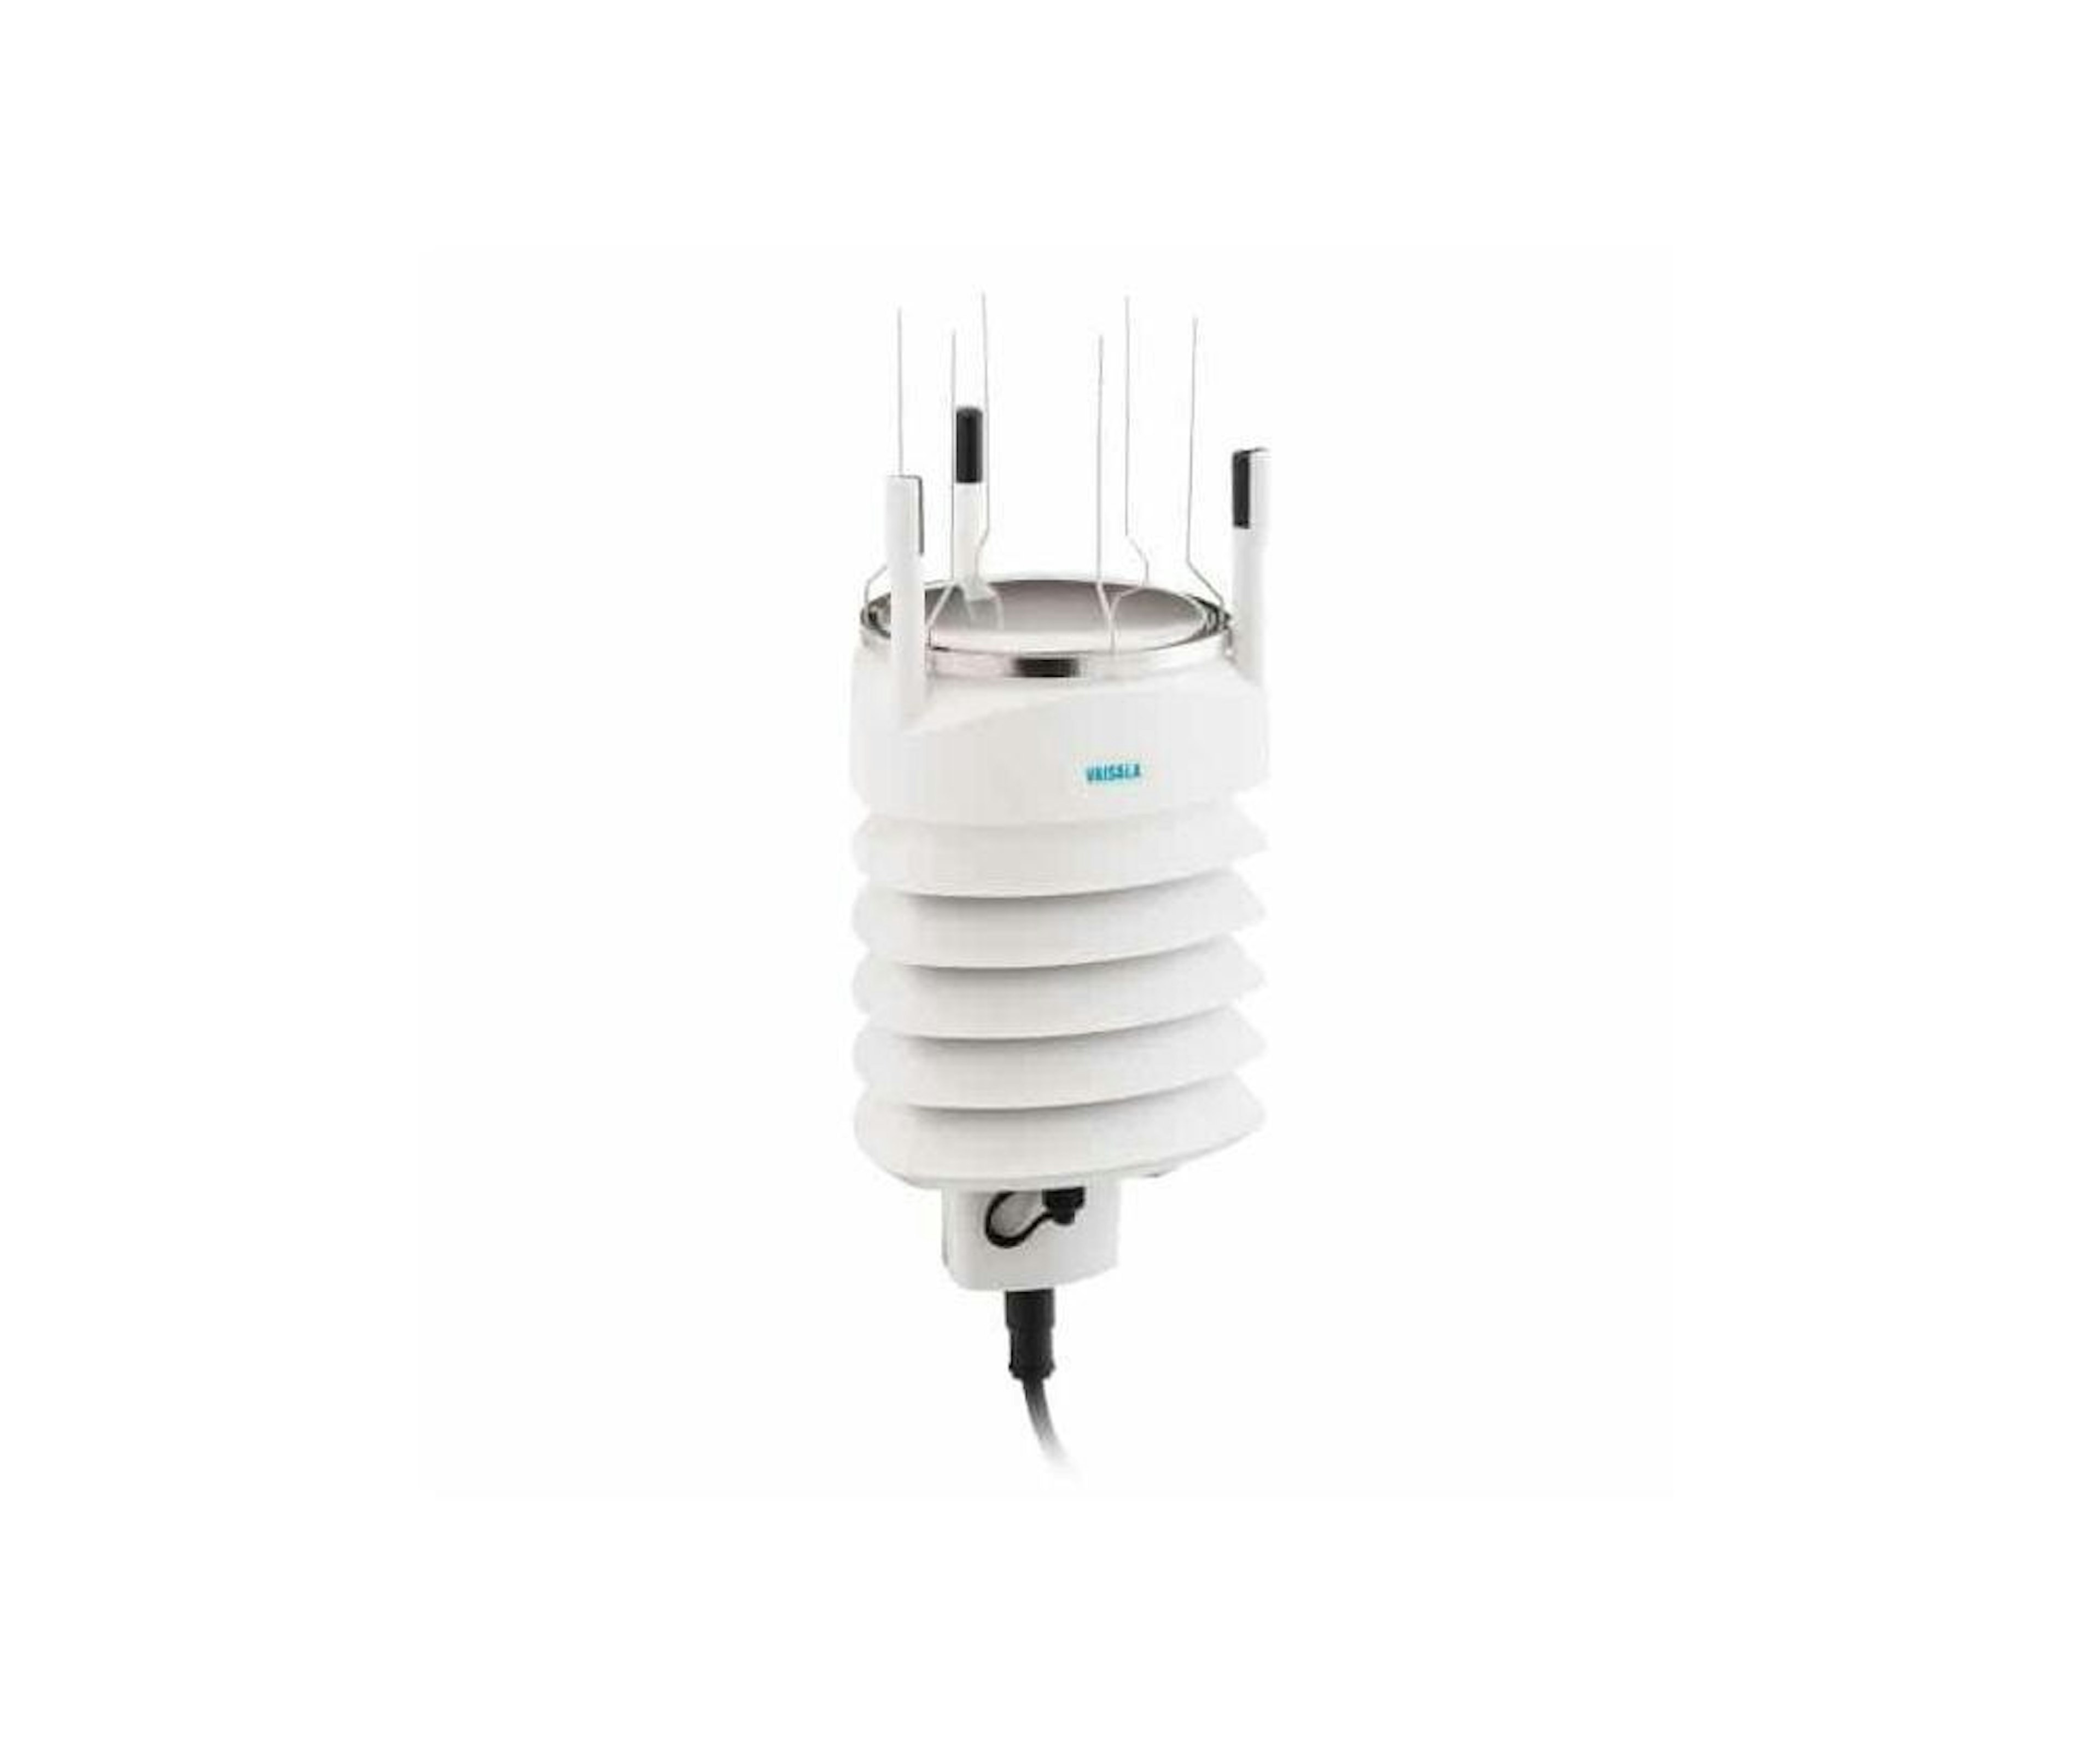 The Vaisala WXT520, one of many sensors that plugs in to the AQM 65 air monitoring system.